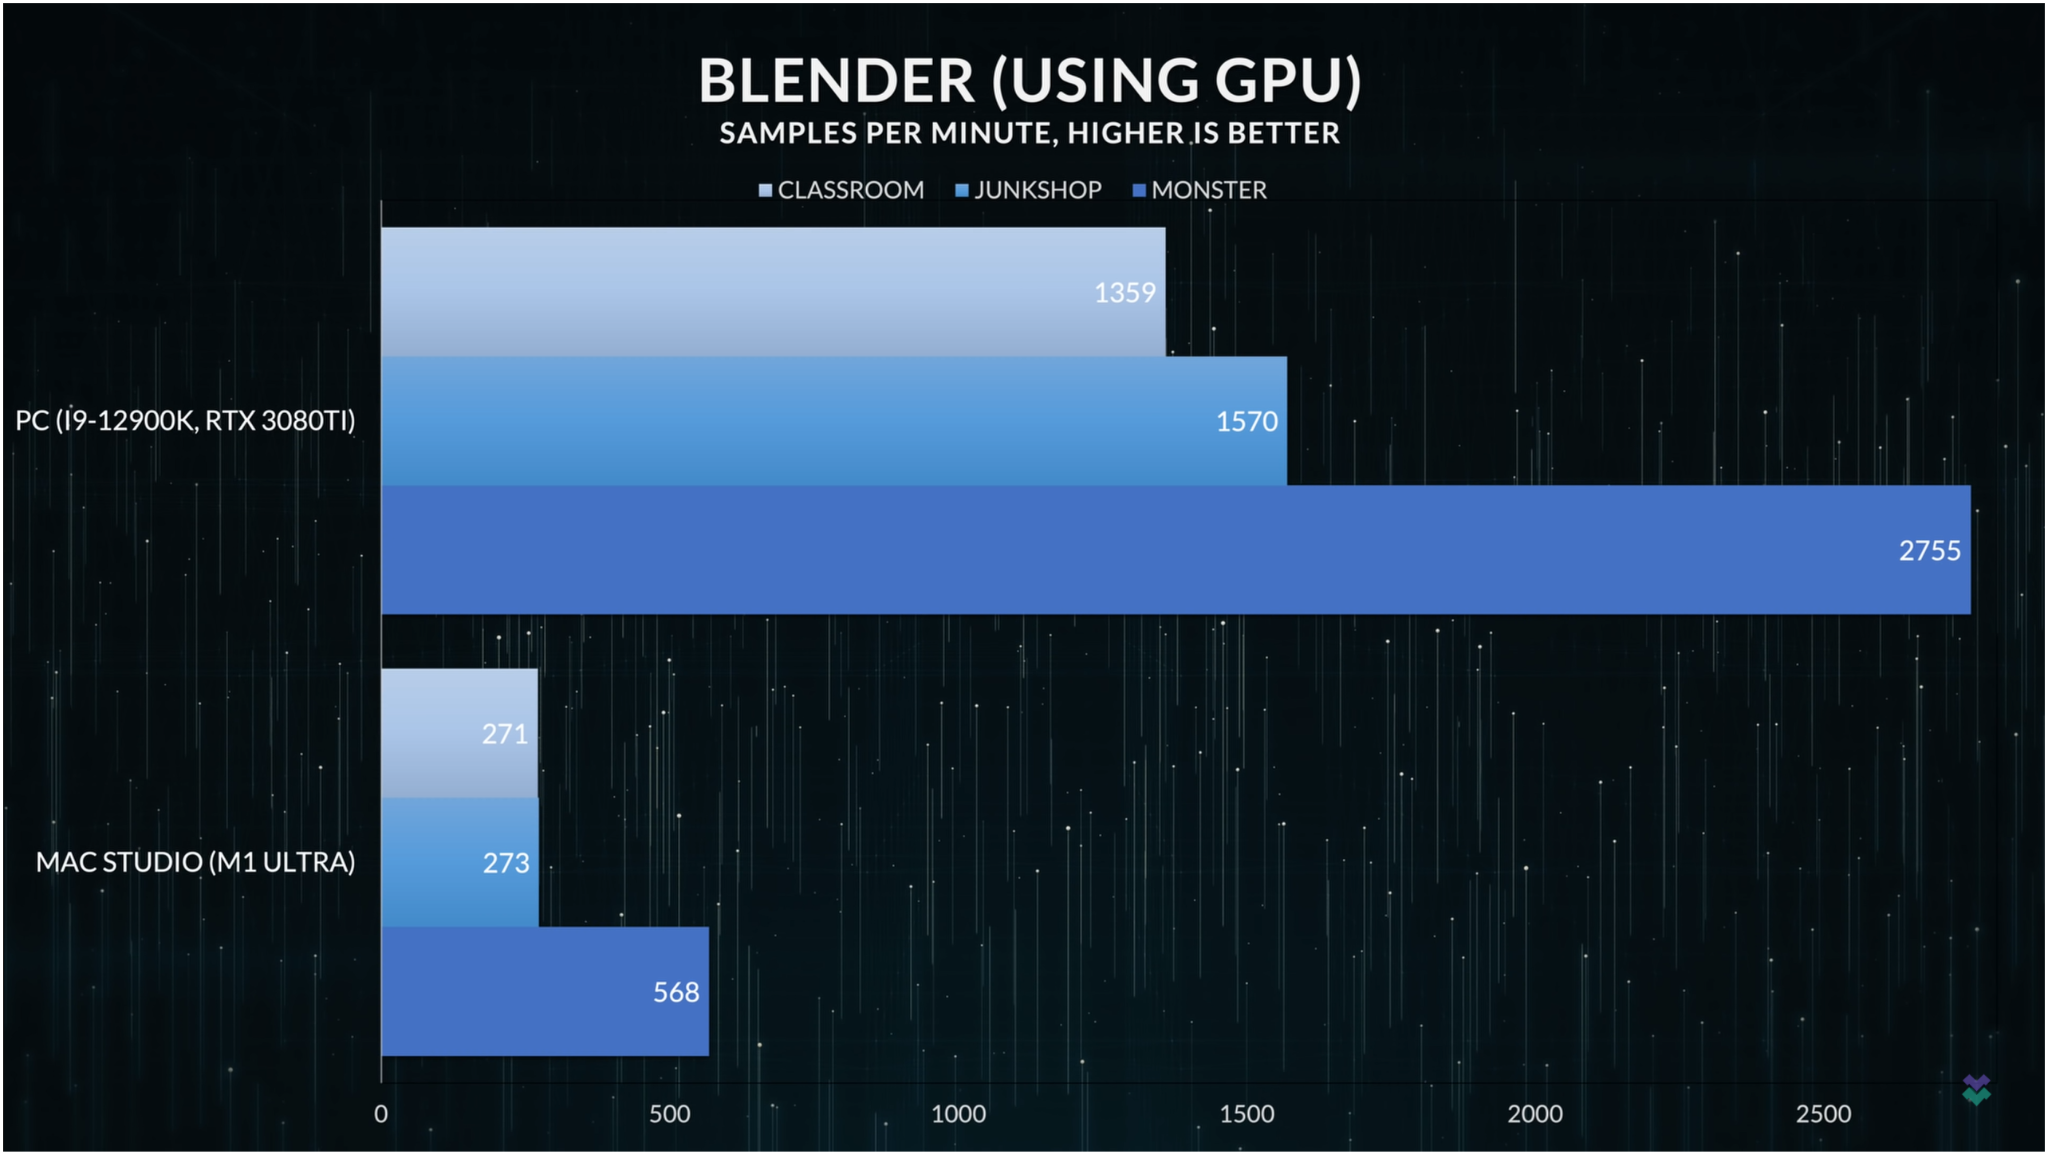 Blender (Using GPU) Benchmark for PC with Intel i9-12900K/RTX3080Ti and Mac Studio with M1 Ultra